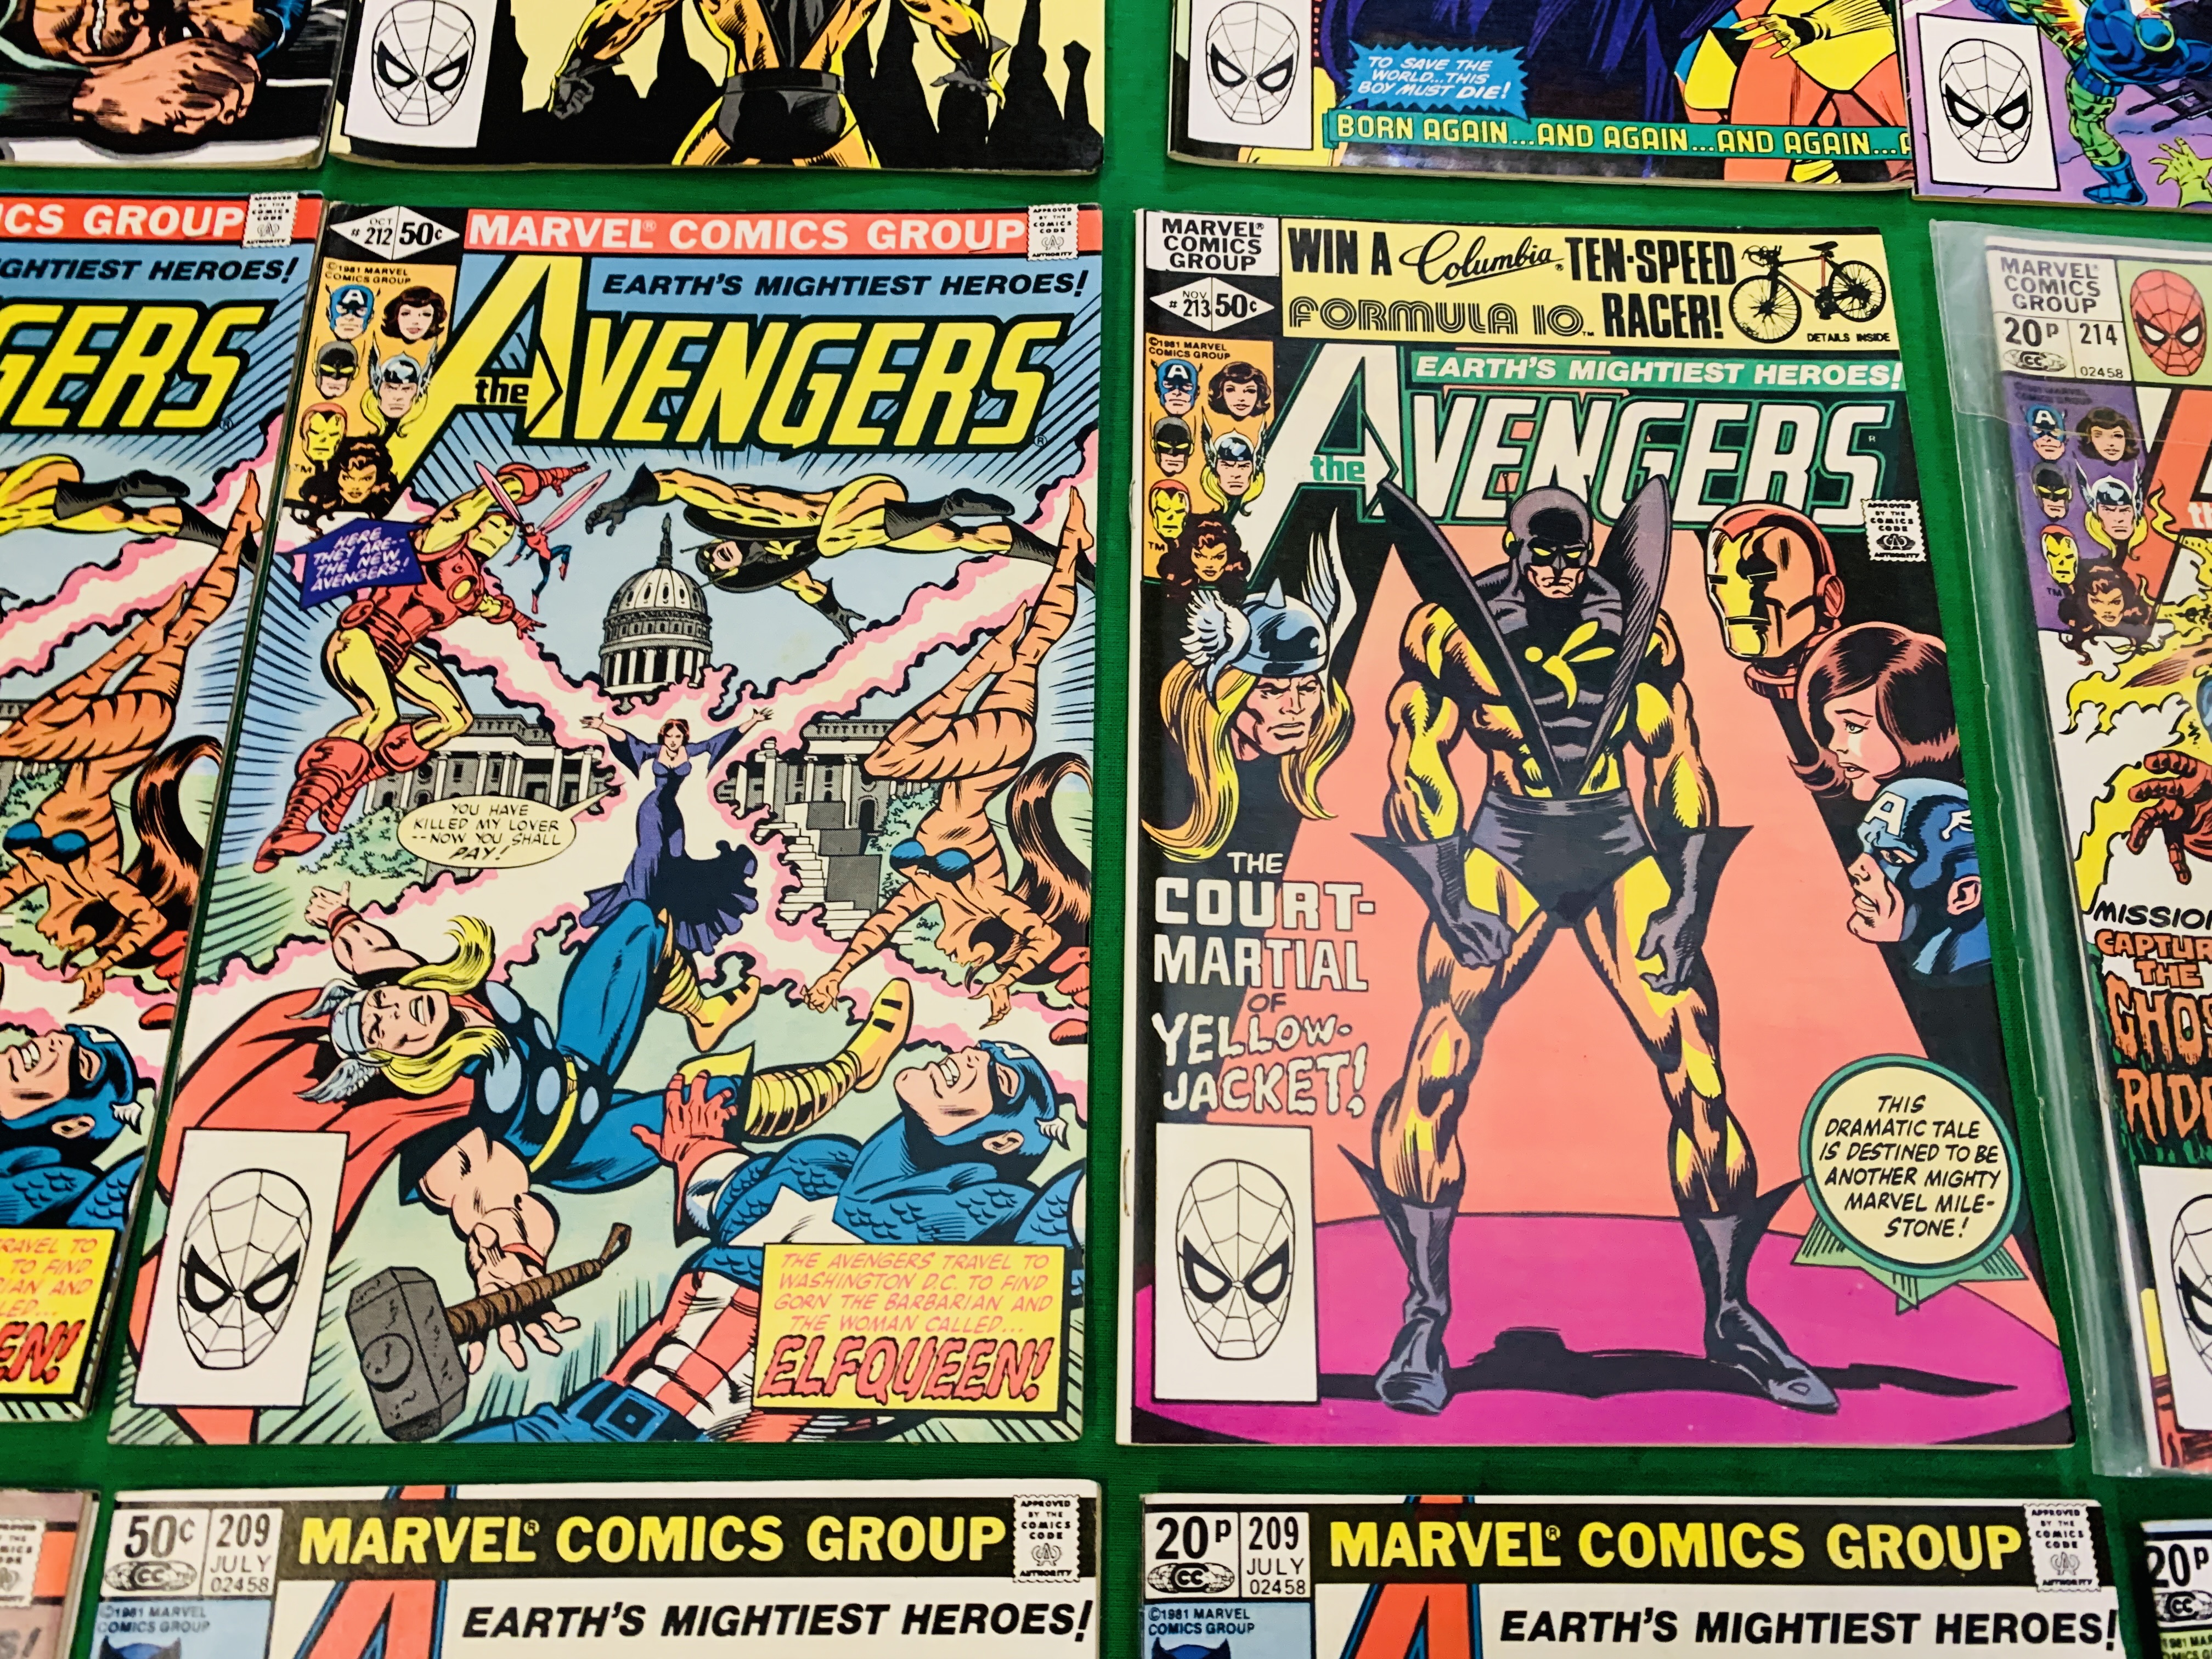 MARVEL COMICS THE AVENGERS NO. 101 - 299, MISSING ISSUES 103 AND 110. - Image 82 of 130